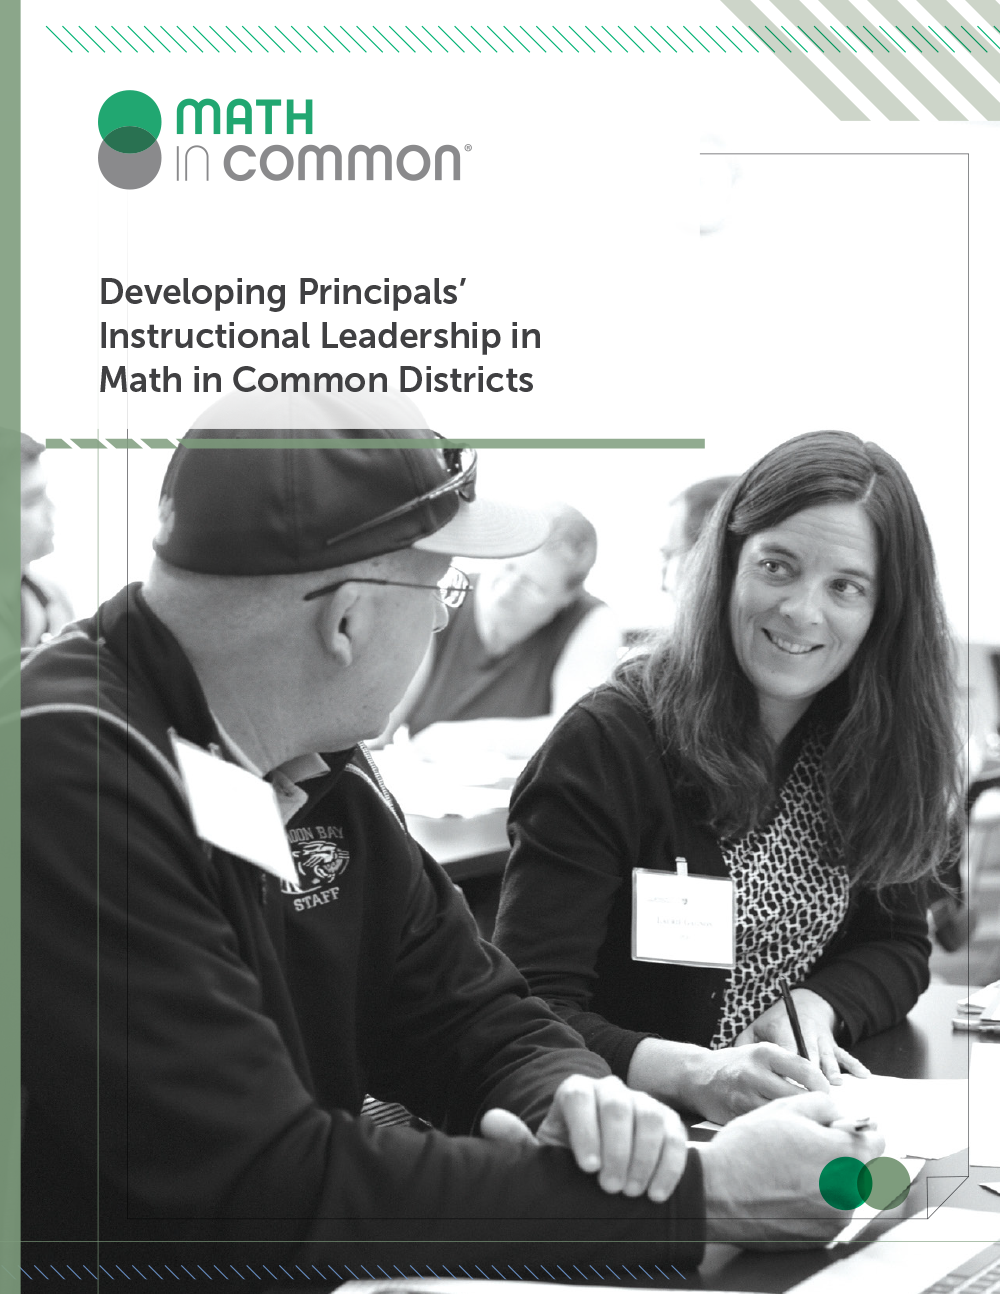 Developing Principals’ Instructional Leadership in Math in Common Districts